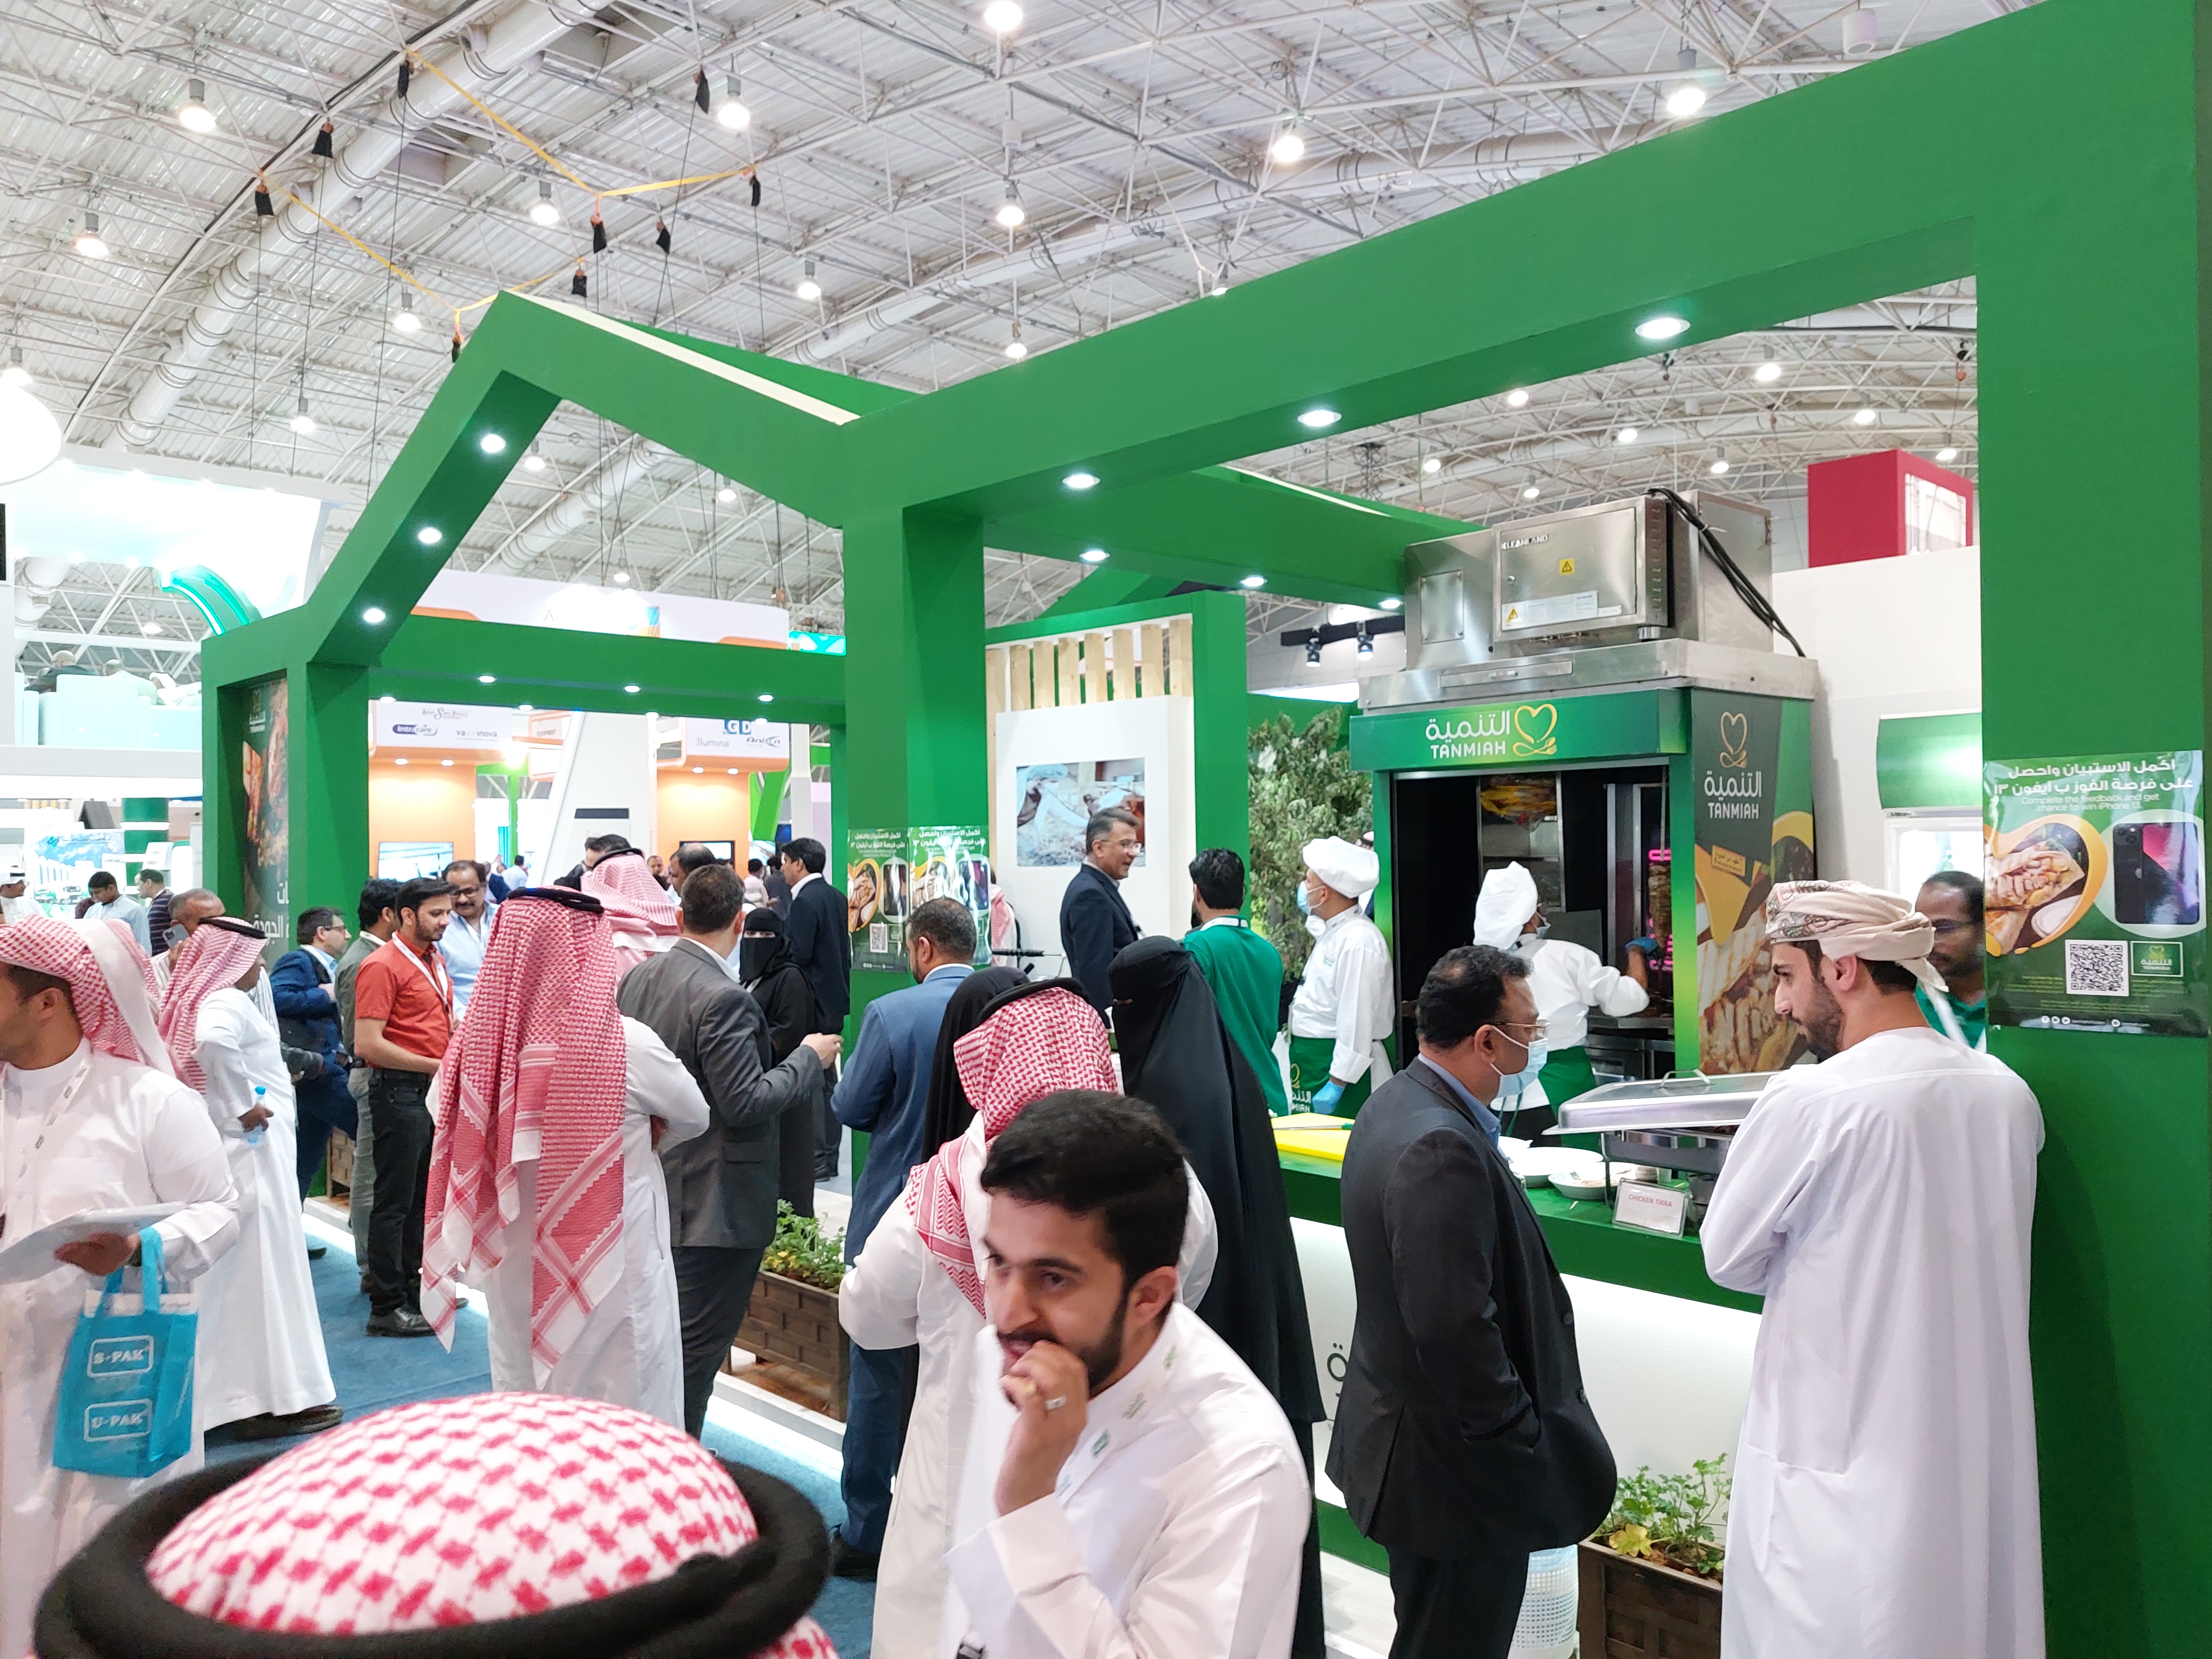 Tanmiah, Diamond Sponsor of Middle East Poultry Expo Riyadh 2022